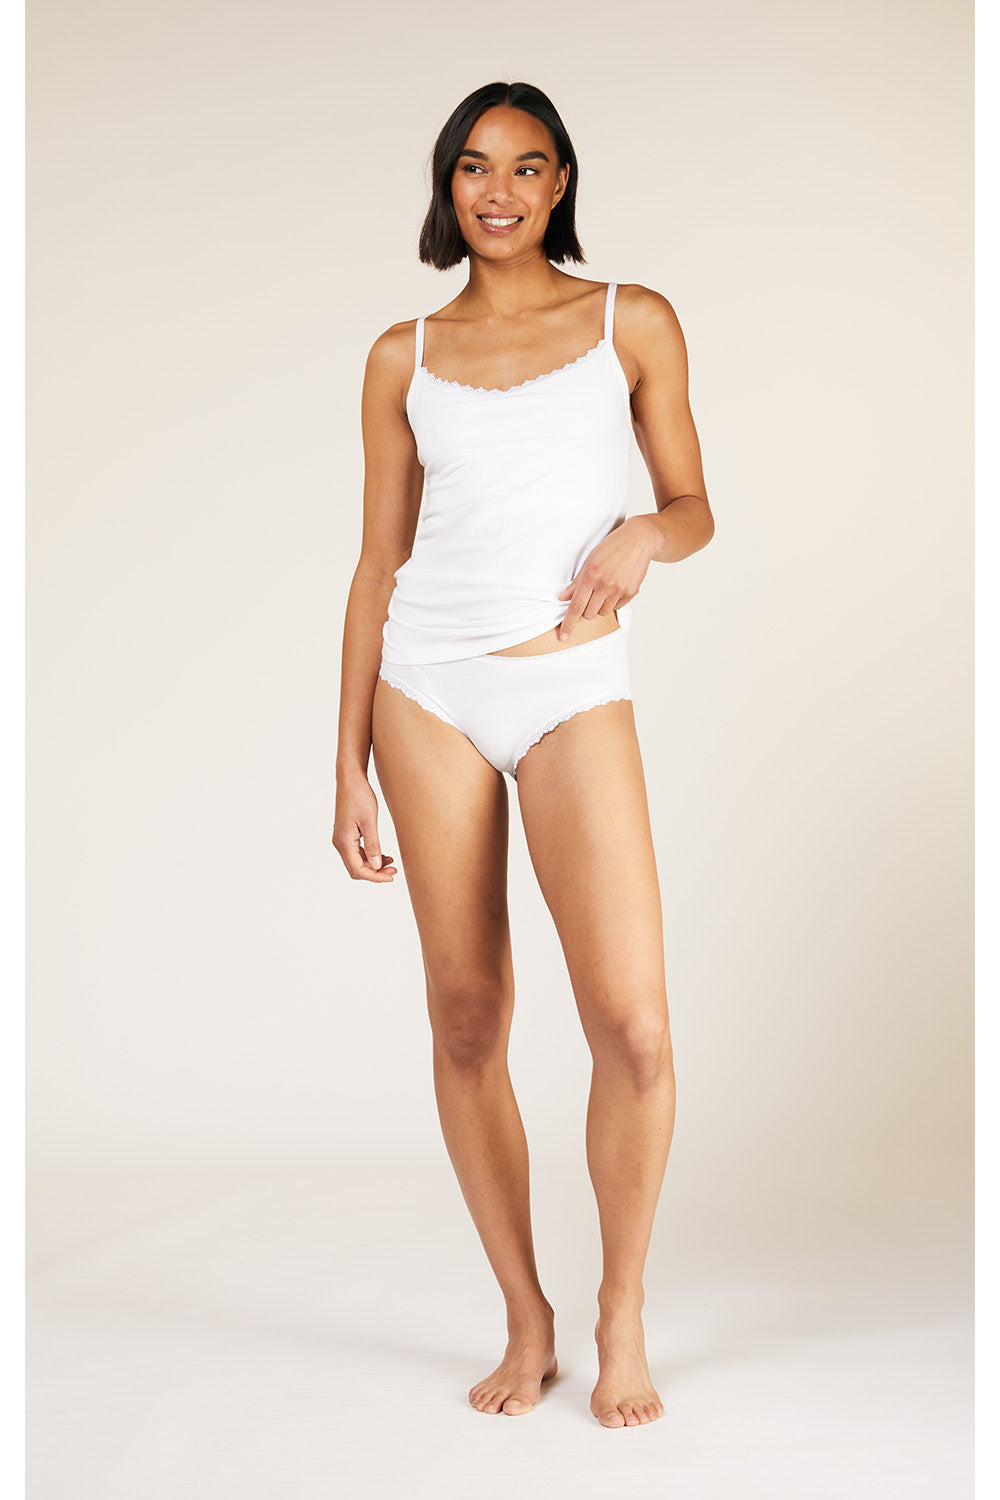 Buy White InvisiSupport Camisole 22, Camisoles and slips